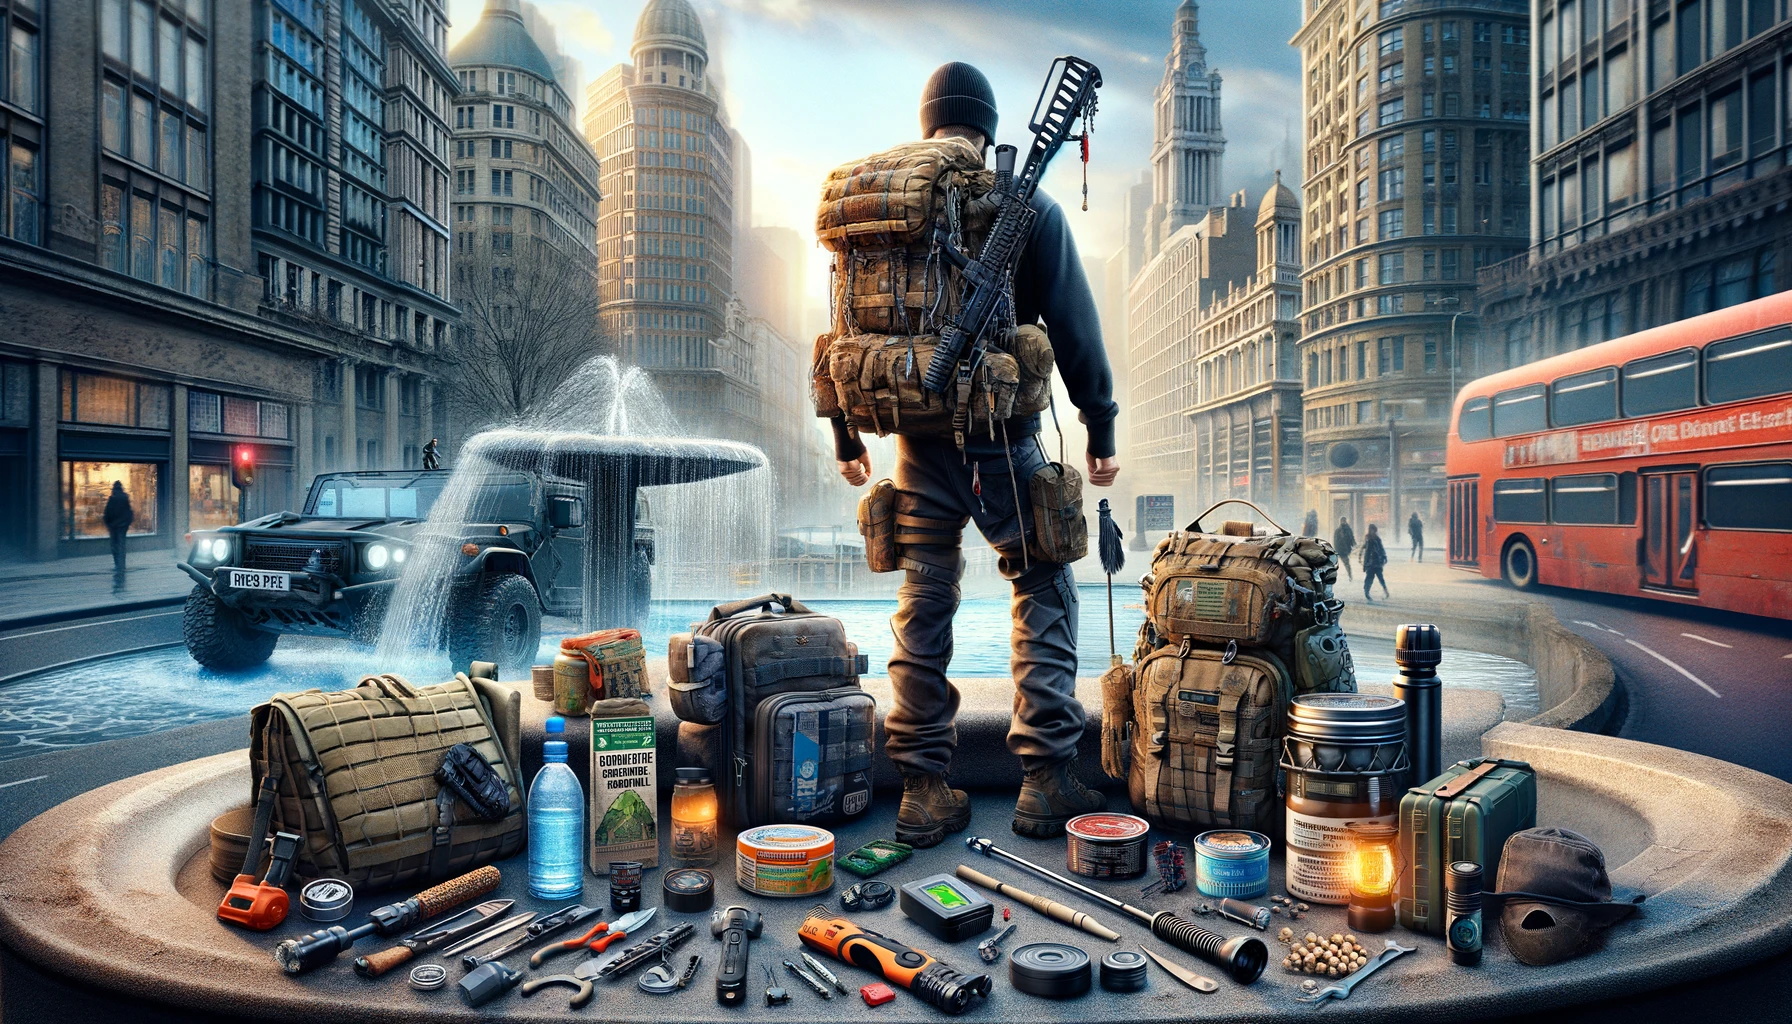 Prepper with essential survival gear navigating through urban environments, demonstrating adaptability with equipment like water purifiers and multi-tools